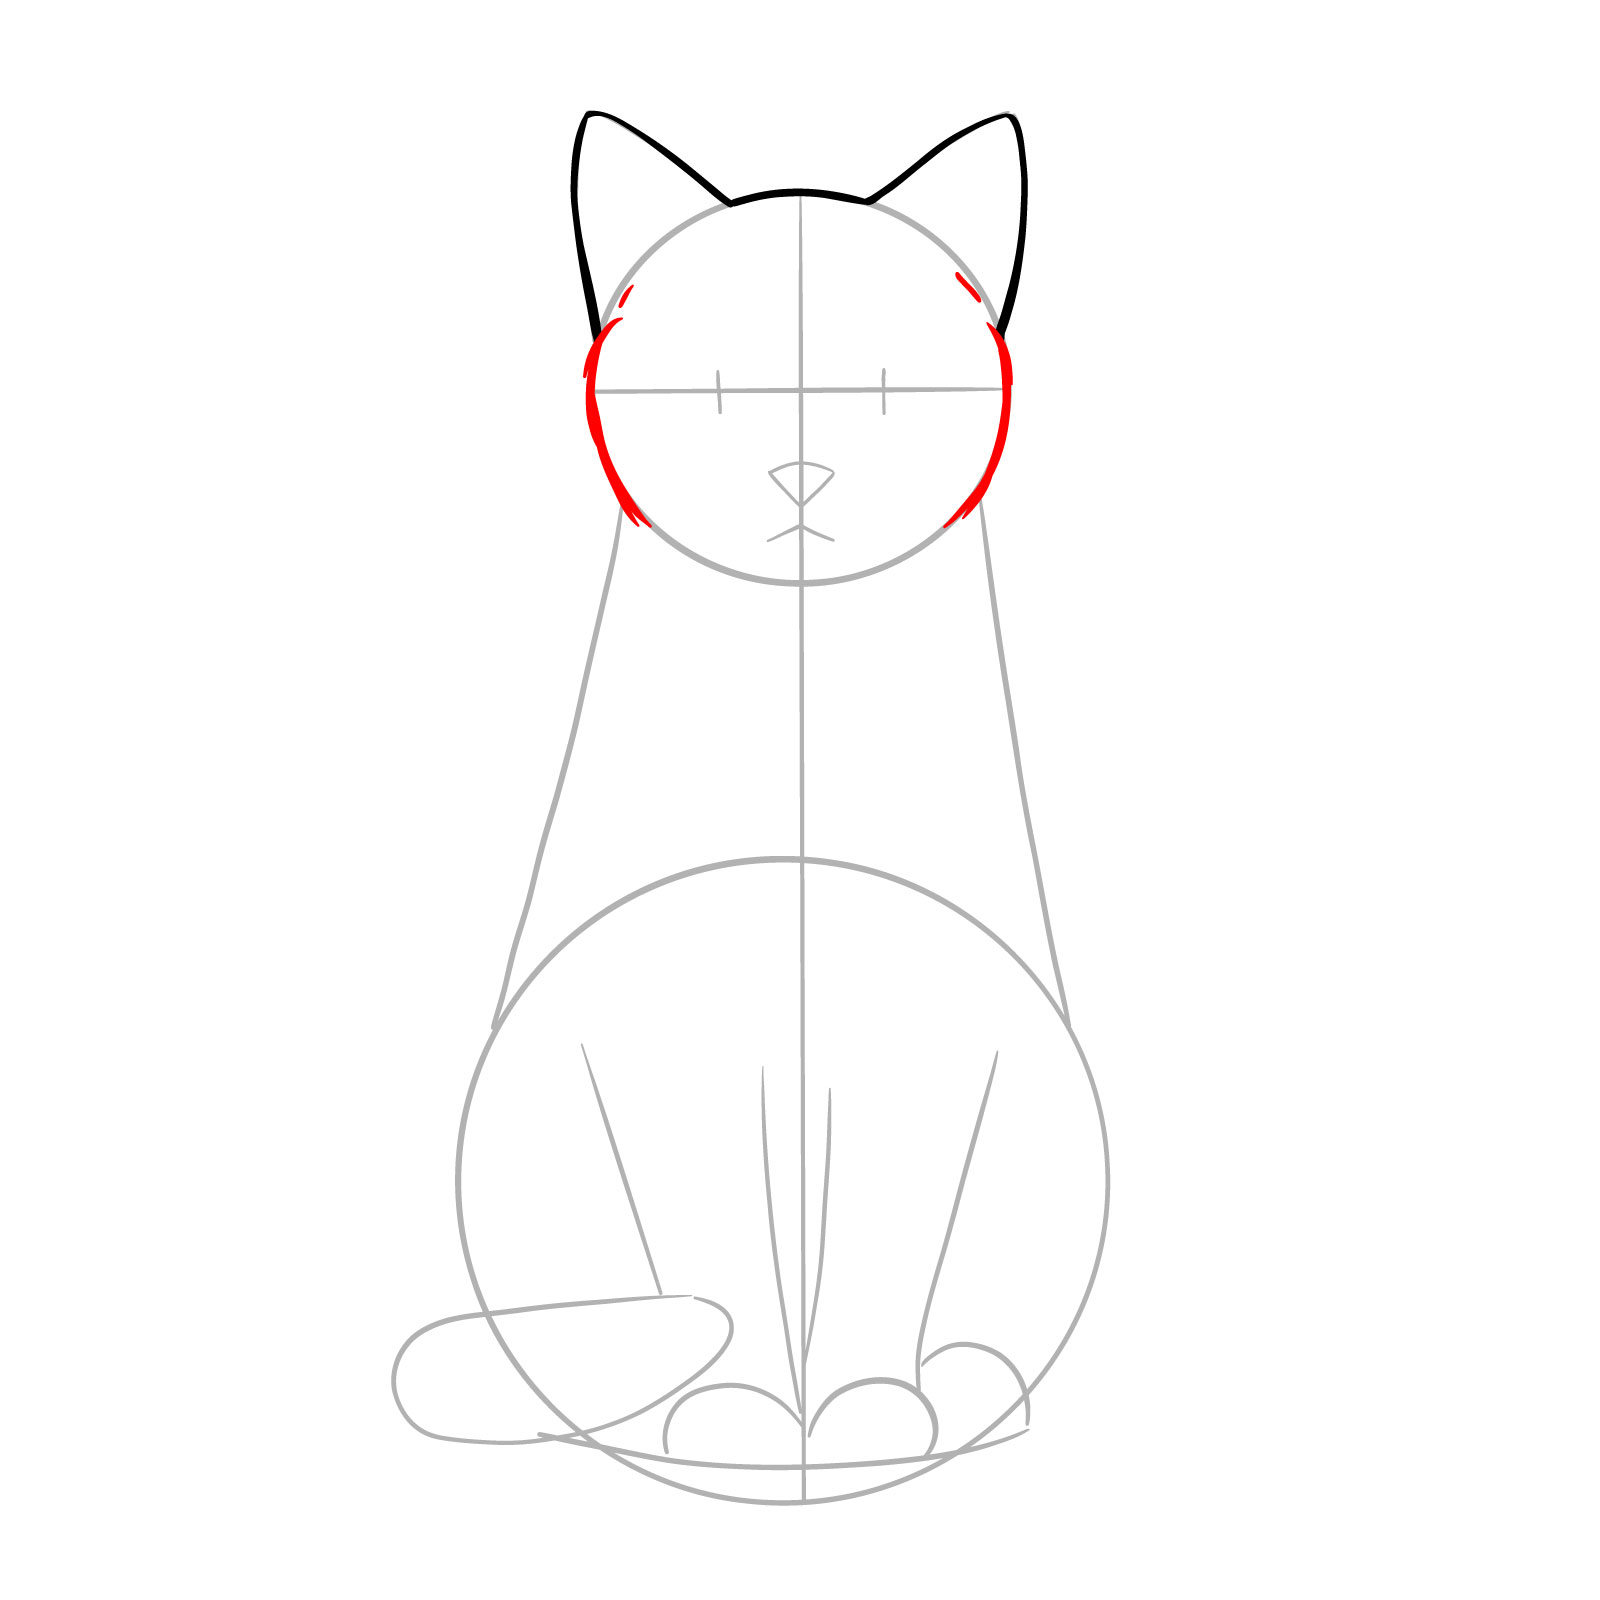 Sketching the cheekbones to shape the sides of a sitting cat's head - step 04